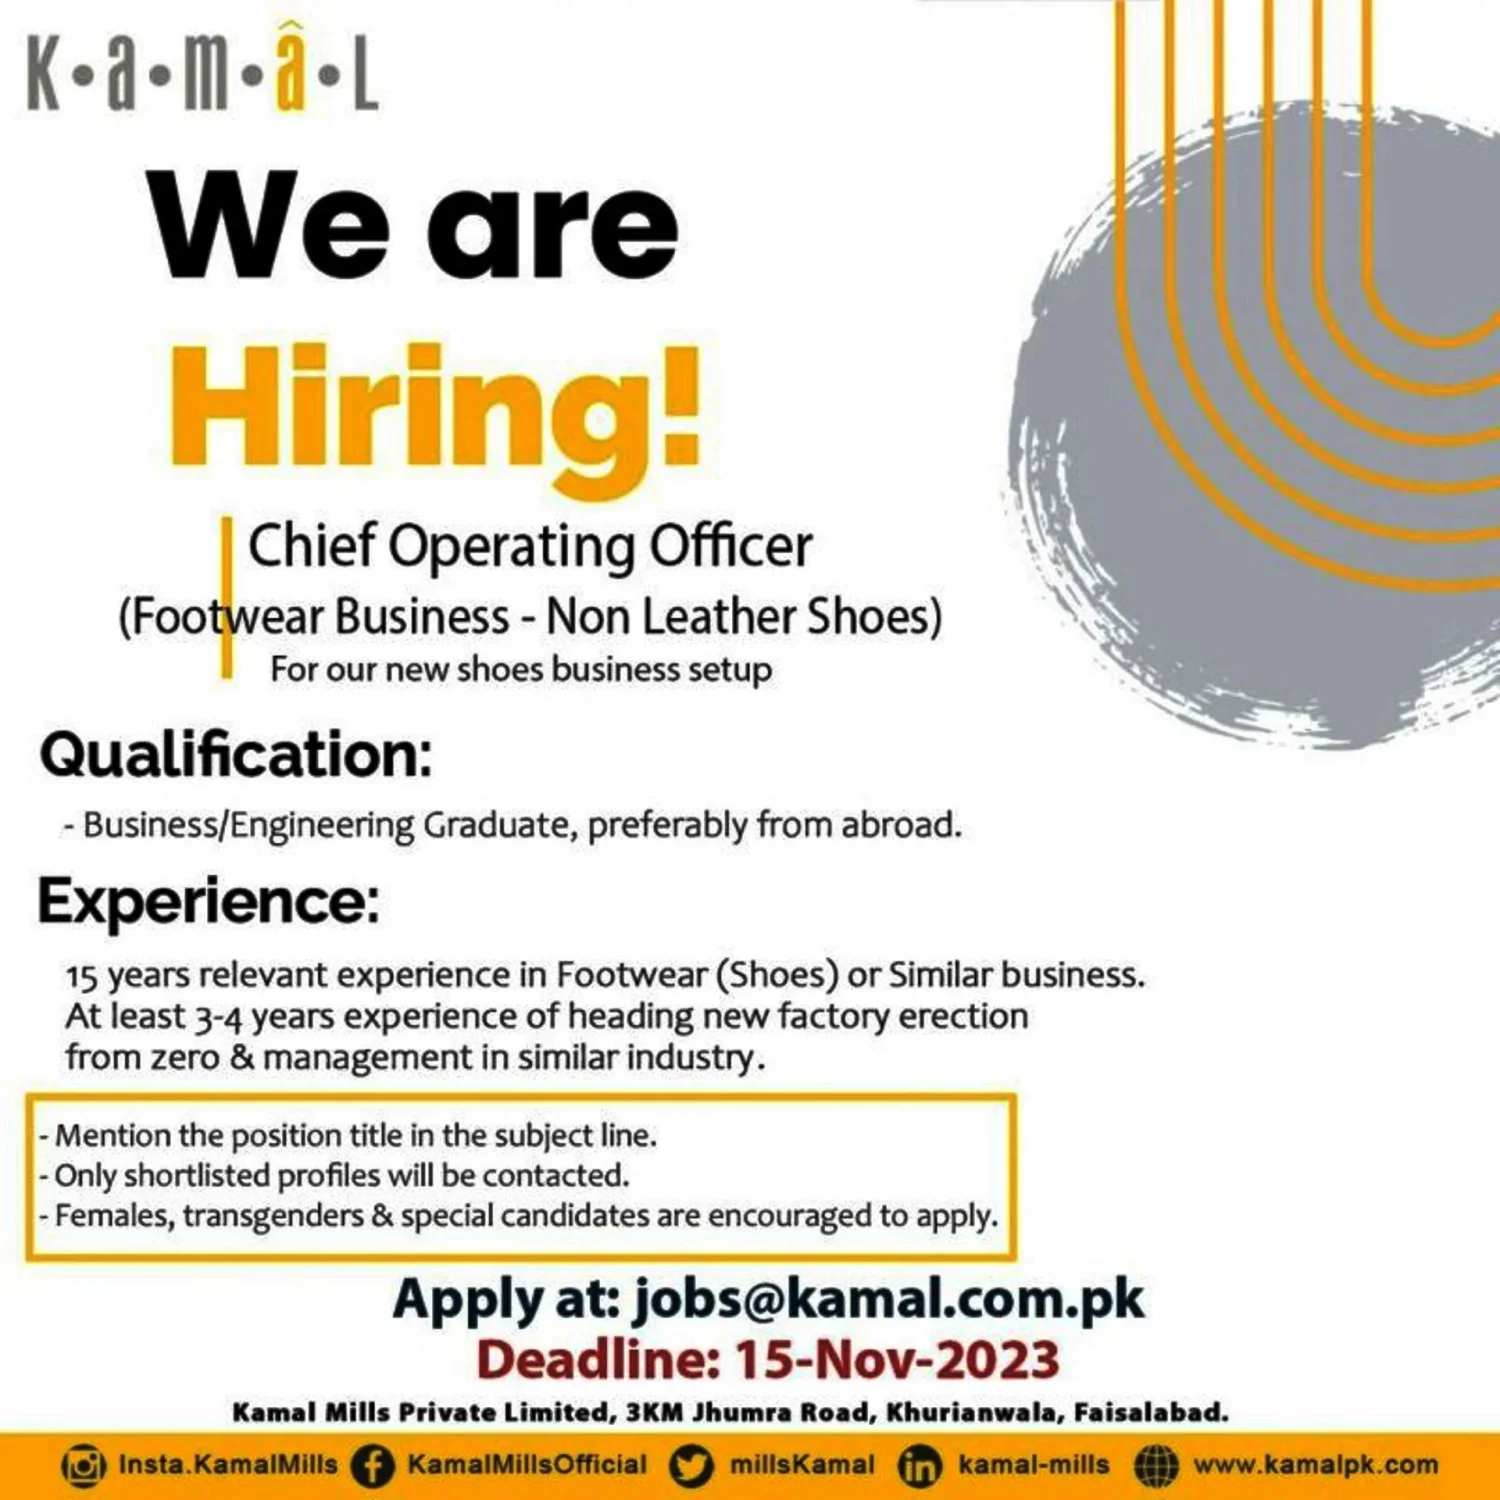 Join Our Team at KamaL